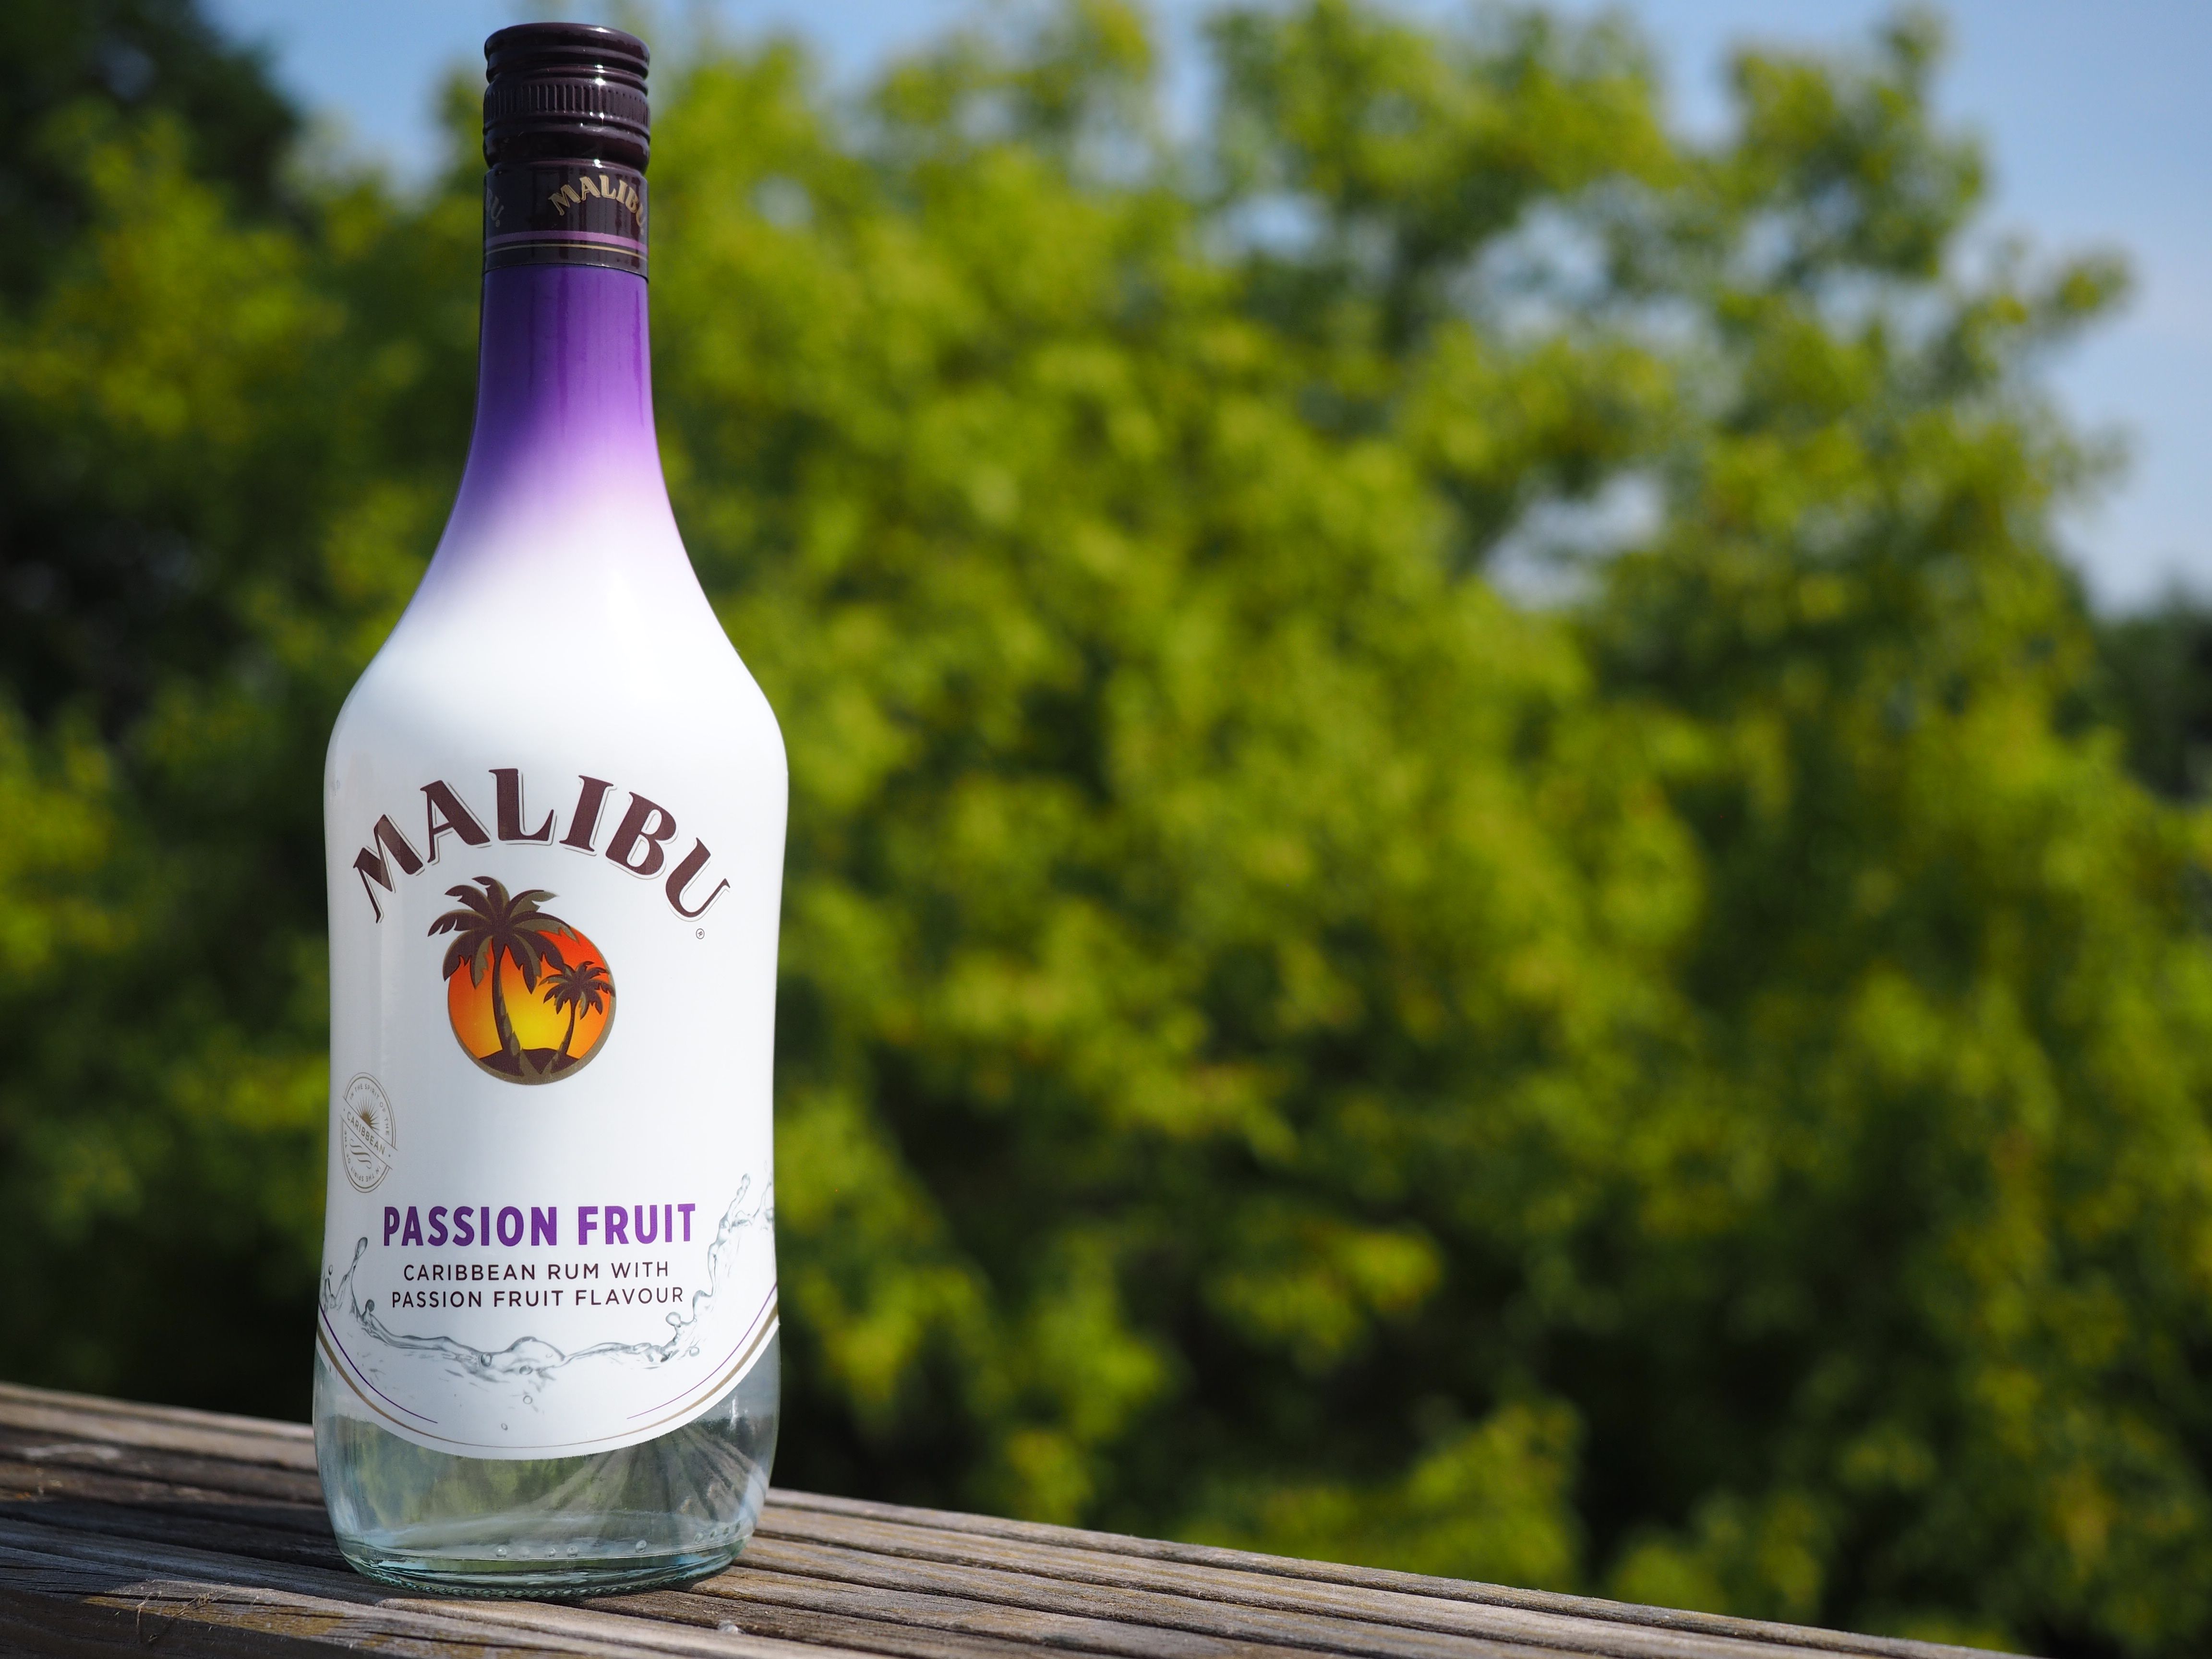 Your Favourite Malibu Now Comes with Passion Fruit